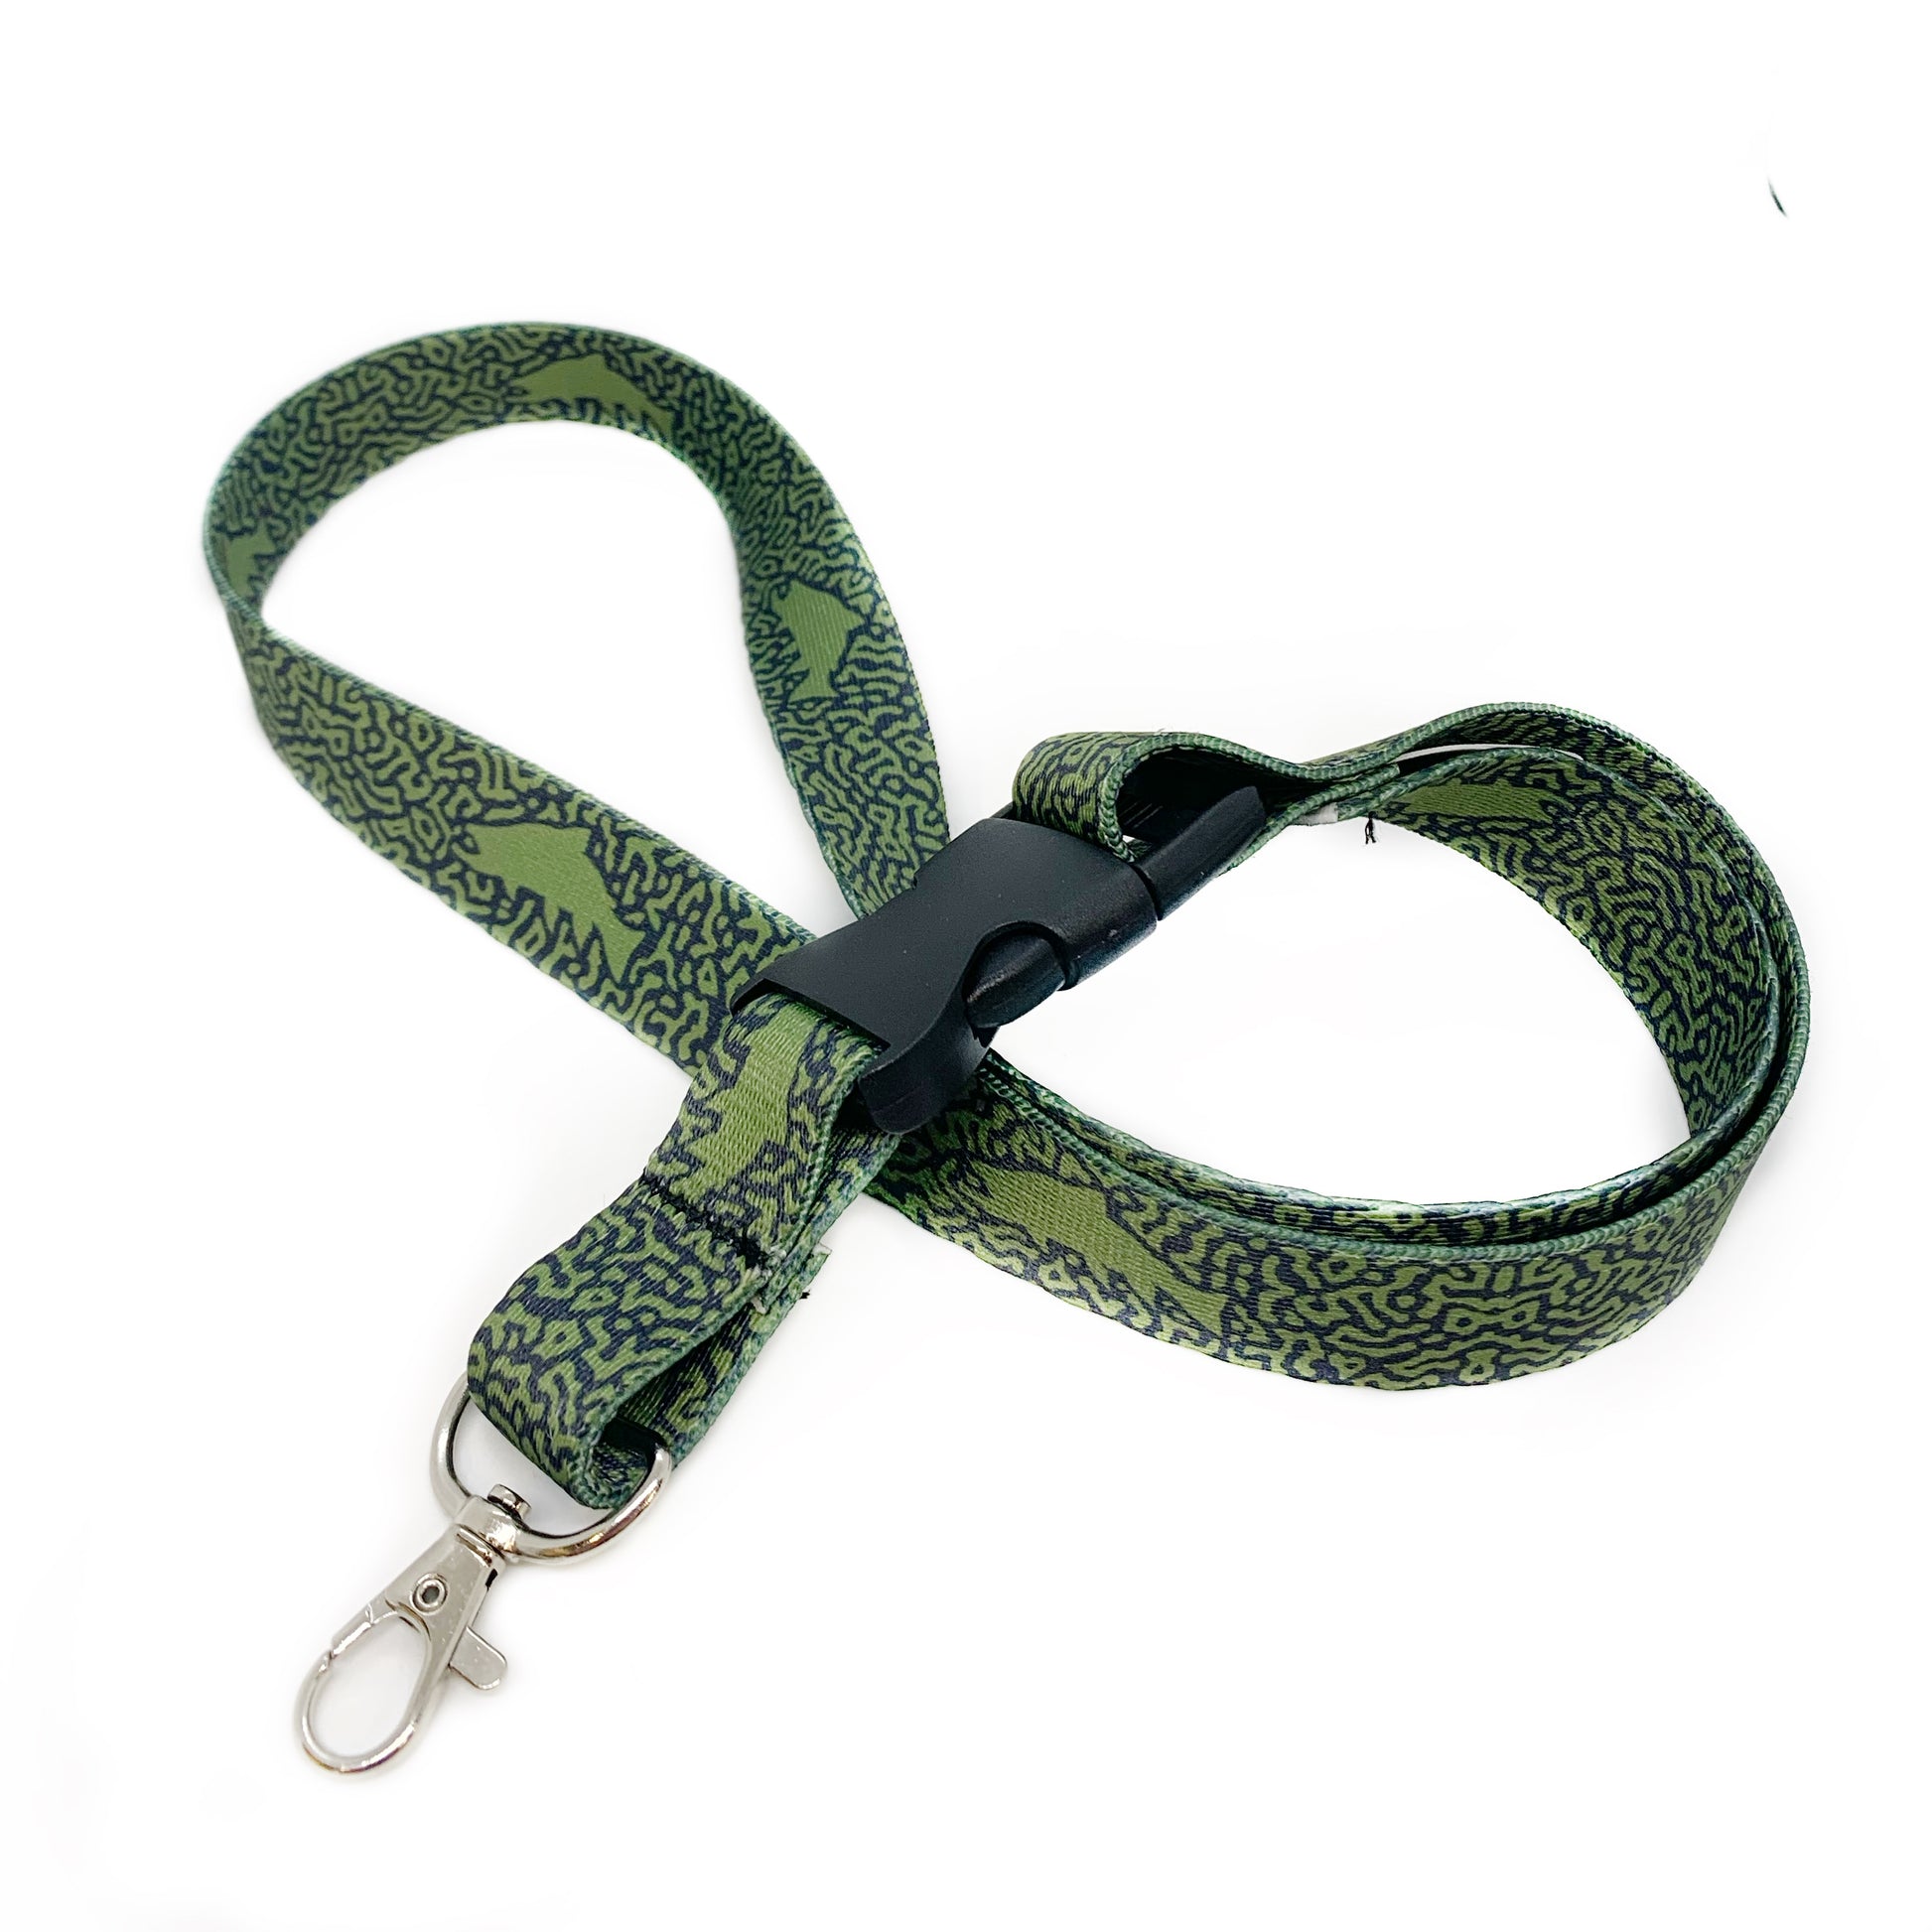 Navy nylon webbing neck lanyard with green fish pattern and with plastic buckle and metal clip